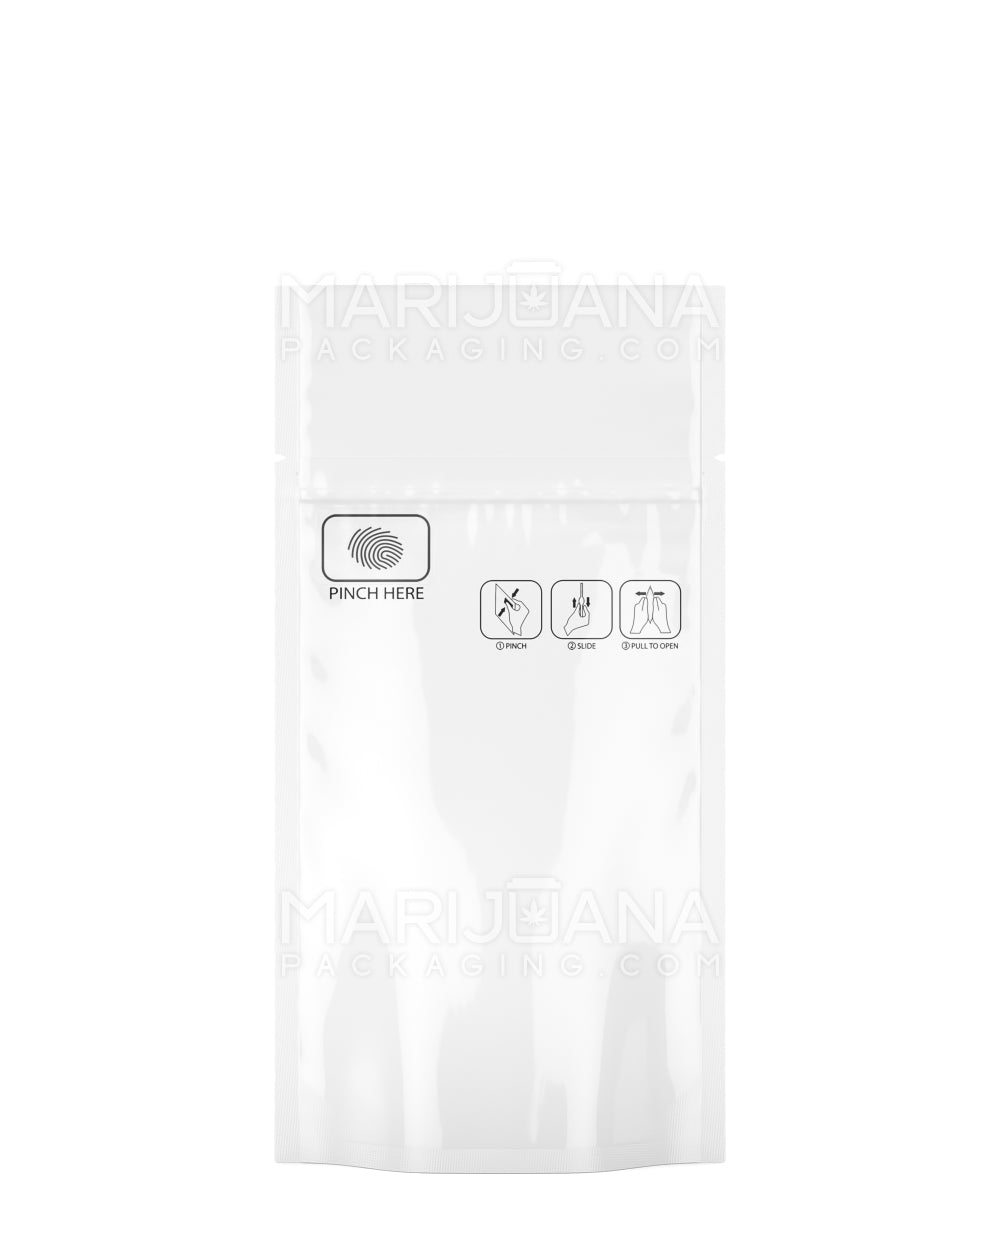 Child Resistant & Tamper Evident | Pinch N Slide 2.0 White Mylar Bags | 3.5in x 5in - 3.5g - 250 Count - 2